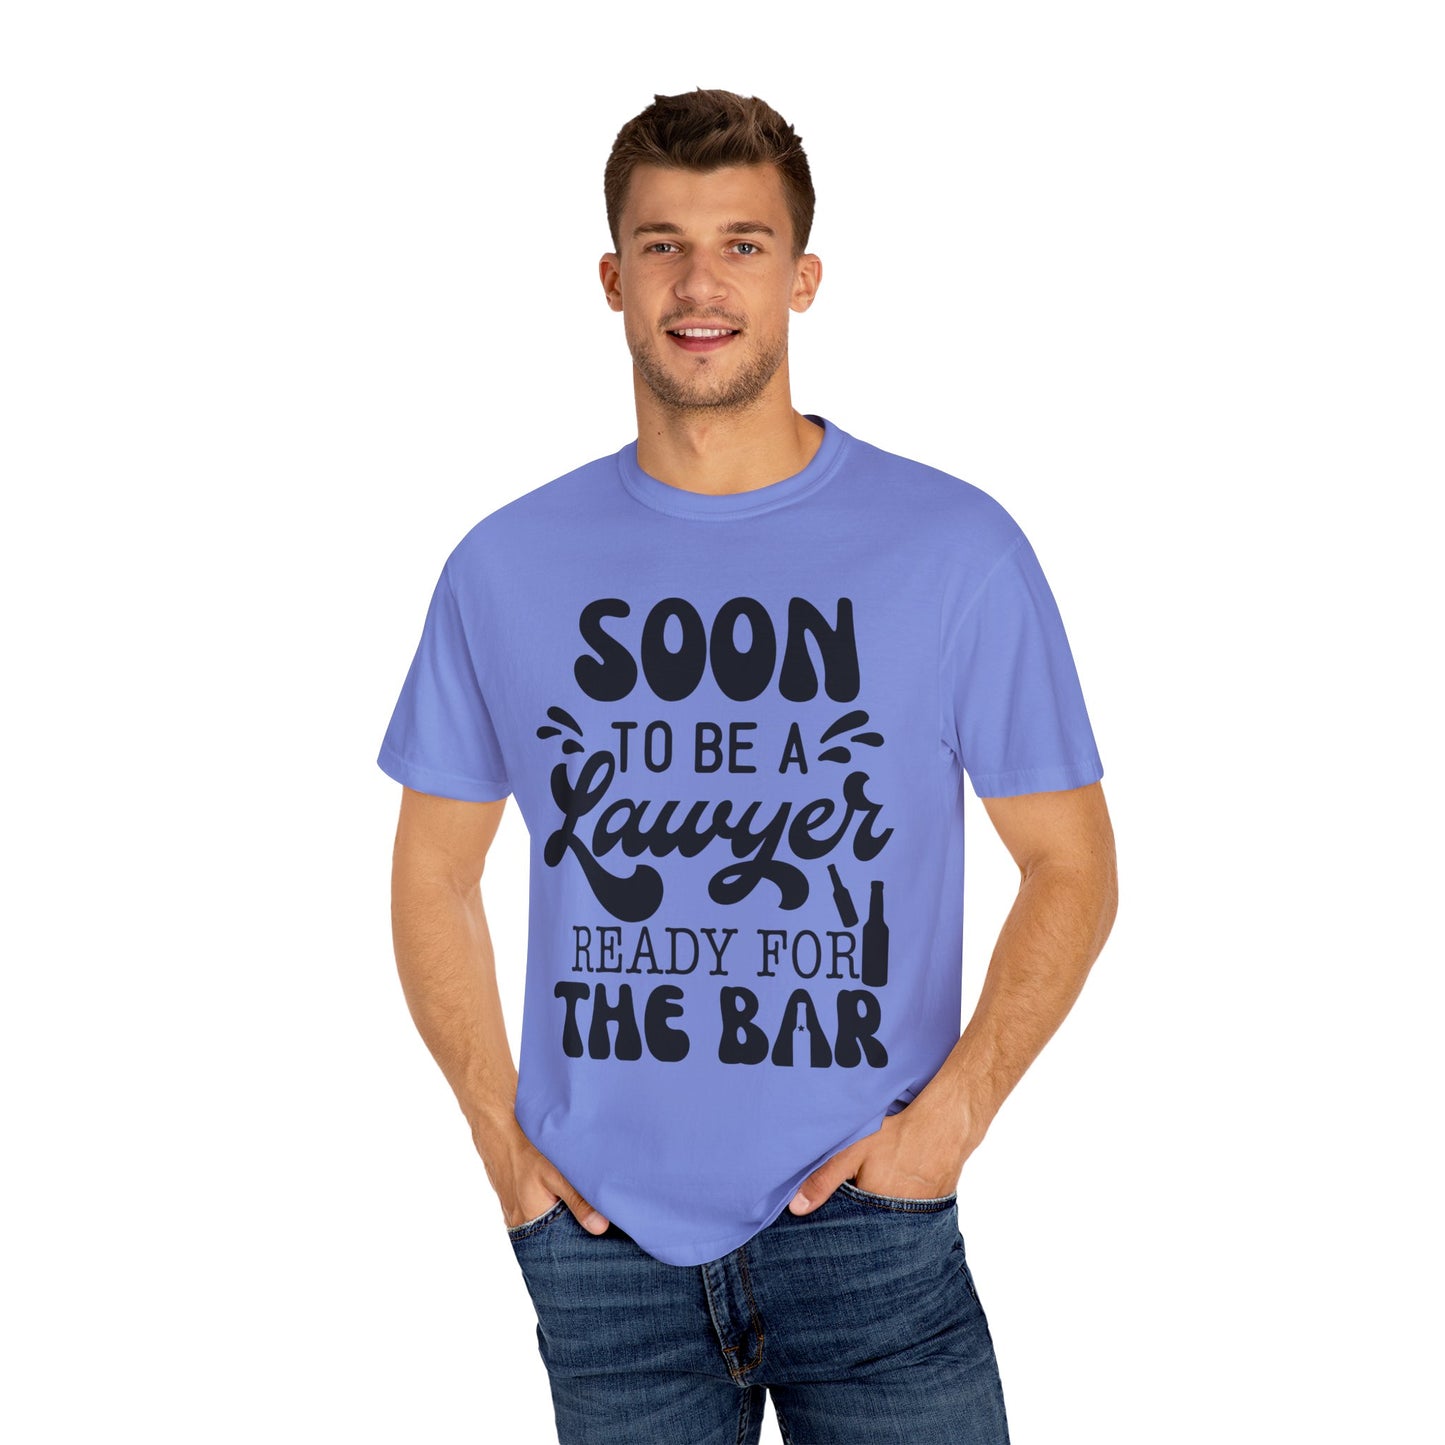 Soon to be a lawyer - Unisex Garment-Dyed T-shirt